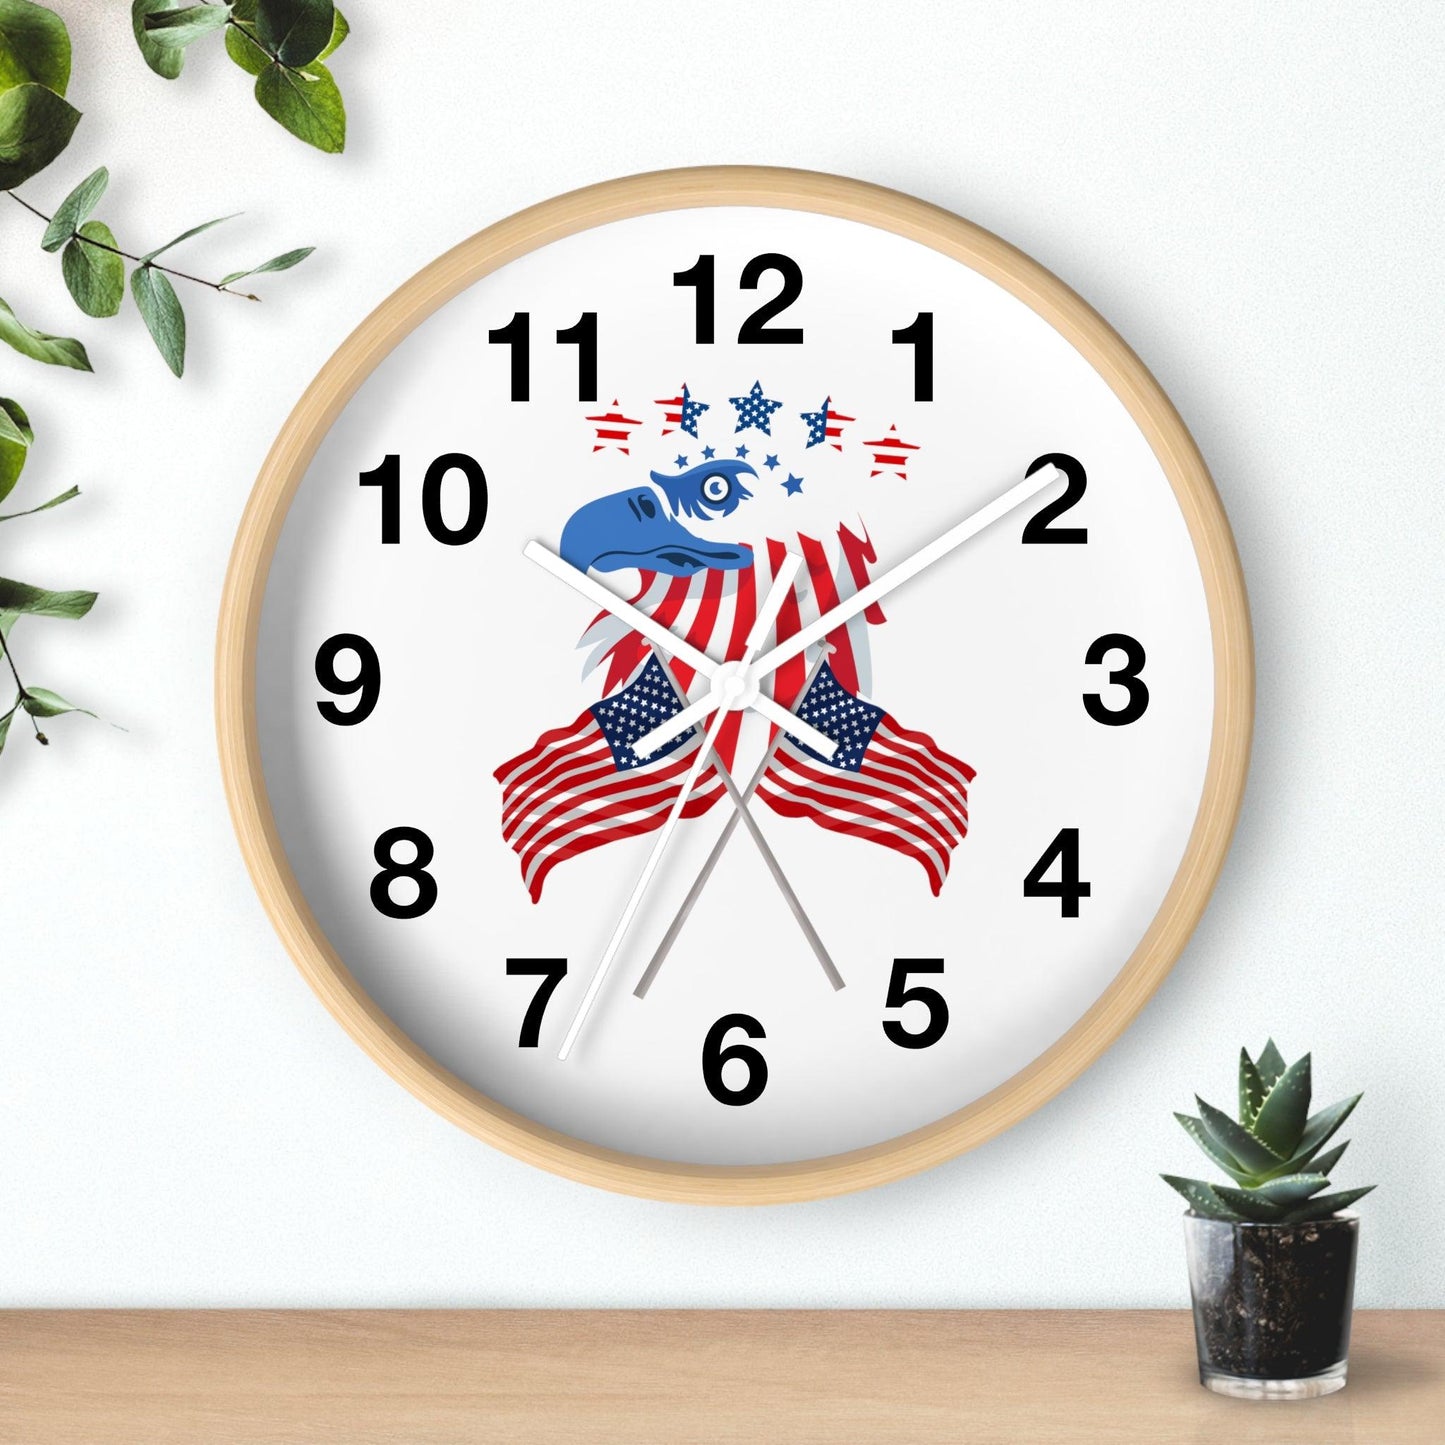 USA Flag Wall Clock, Home decor gift, House Warming gift, New Home Gift, Patriotic Gift School Clock Home Clock Office Clock